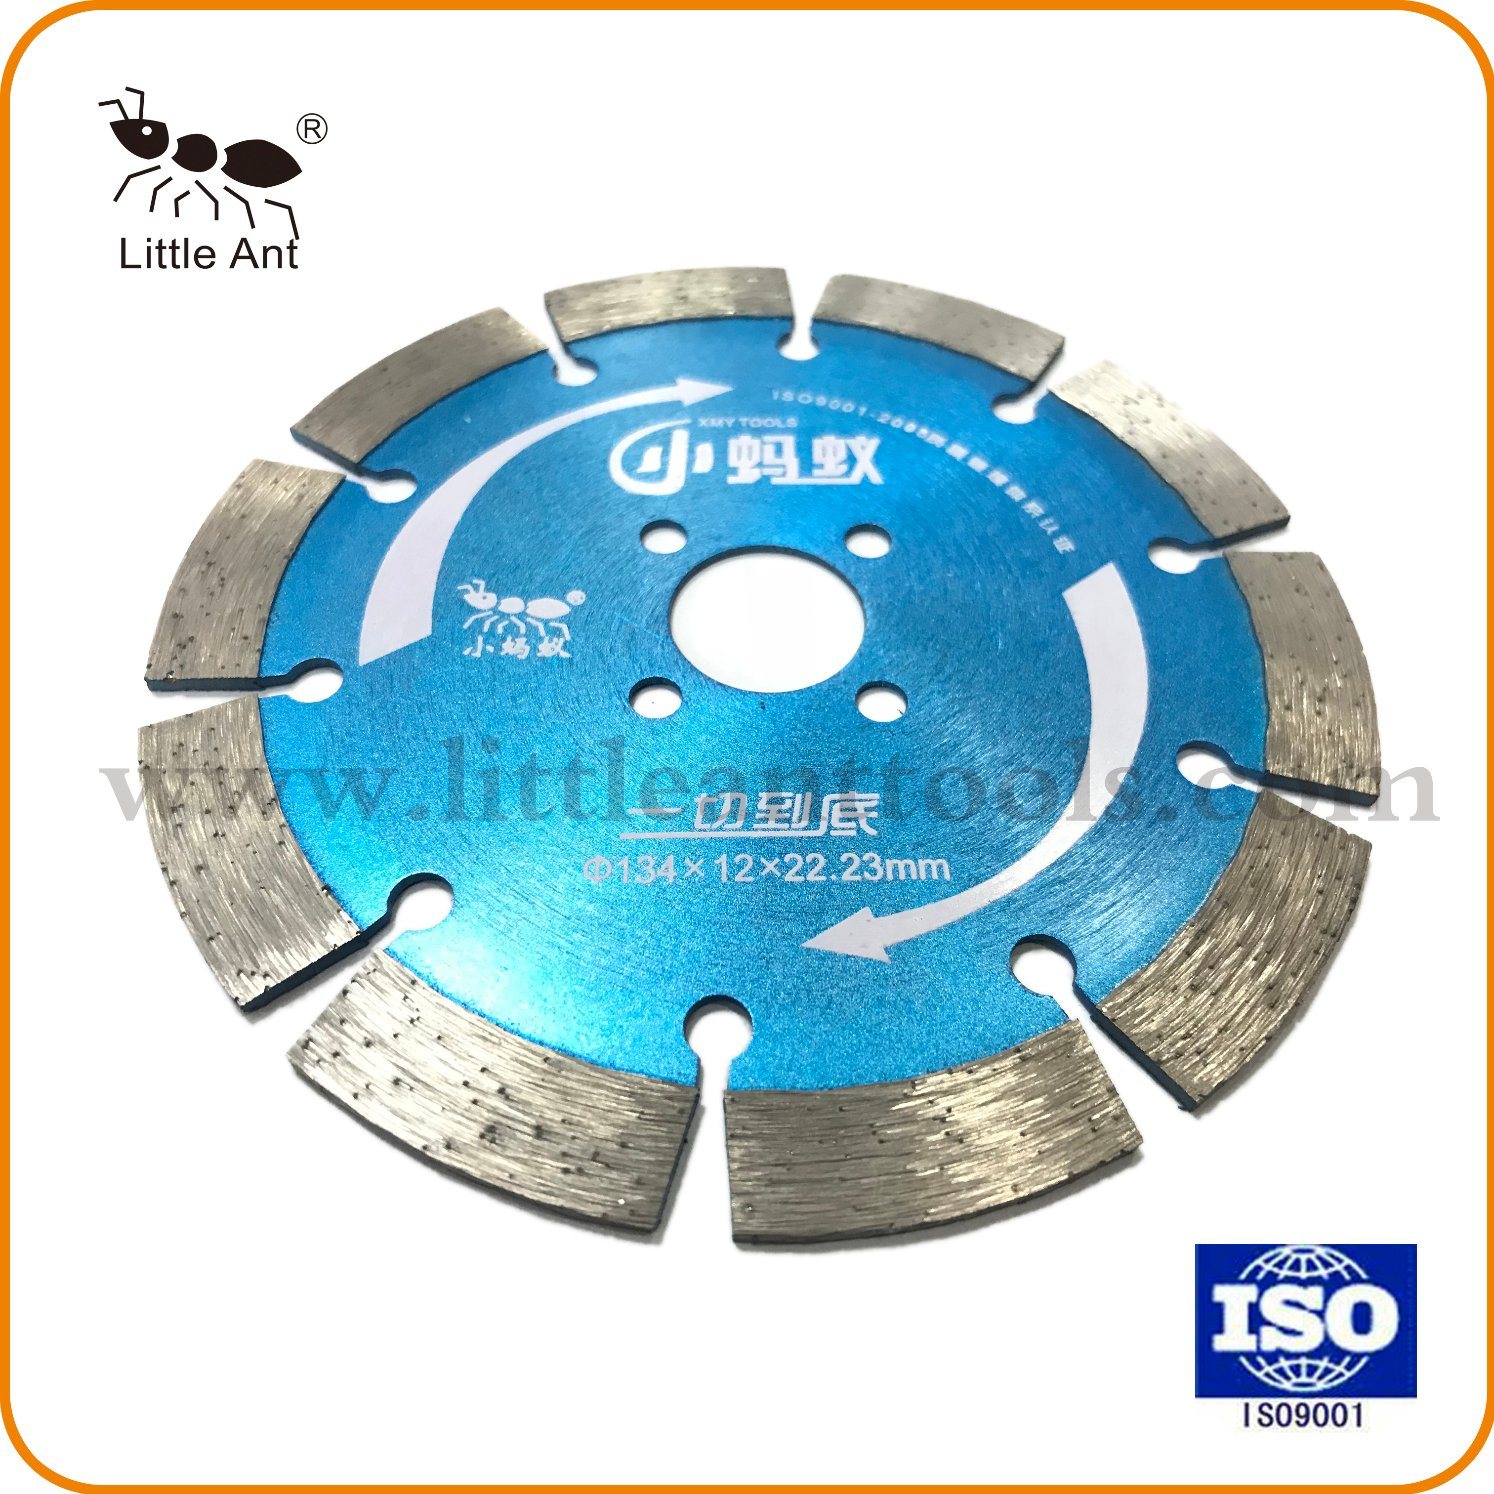 134mm Dry Hardware Tools Cutting Disk Hot-Pressed Diamond Saw Blade